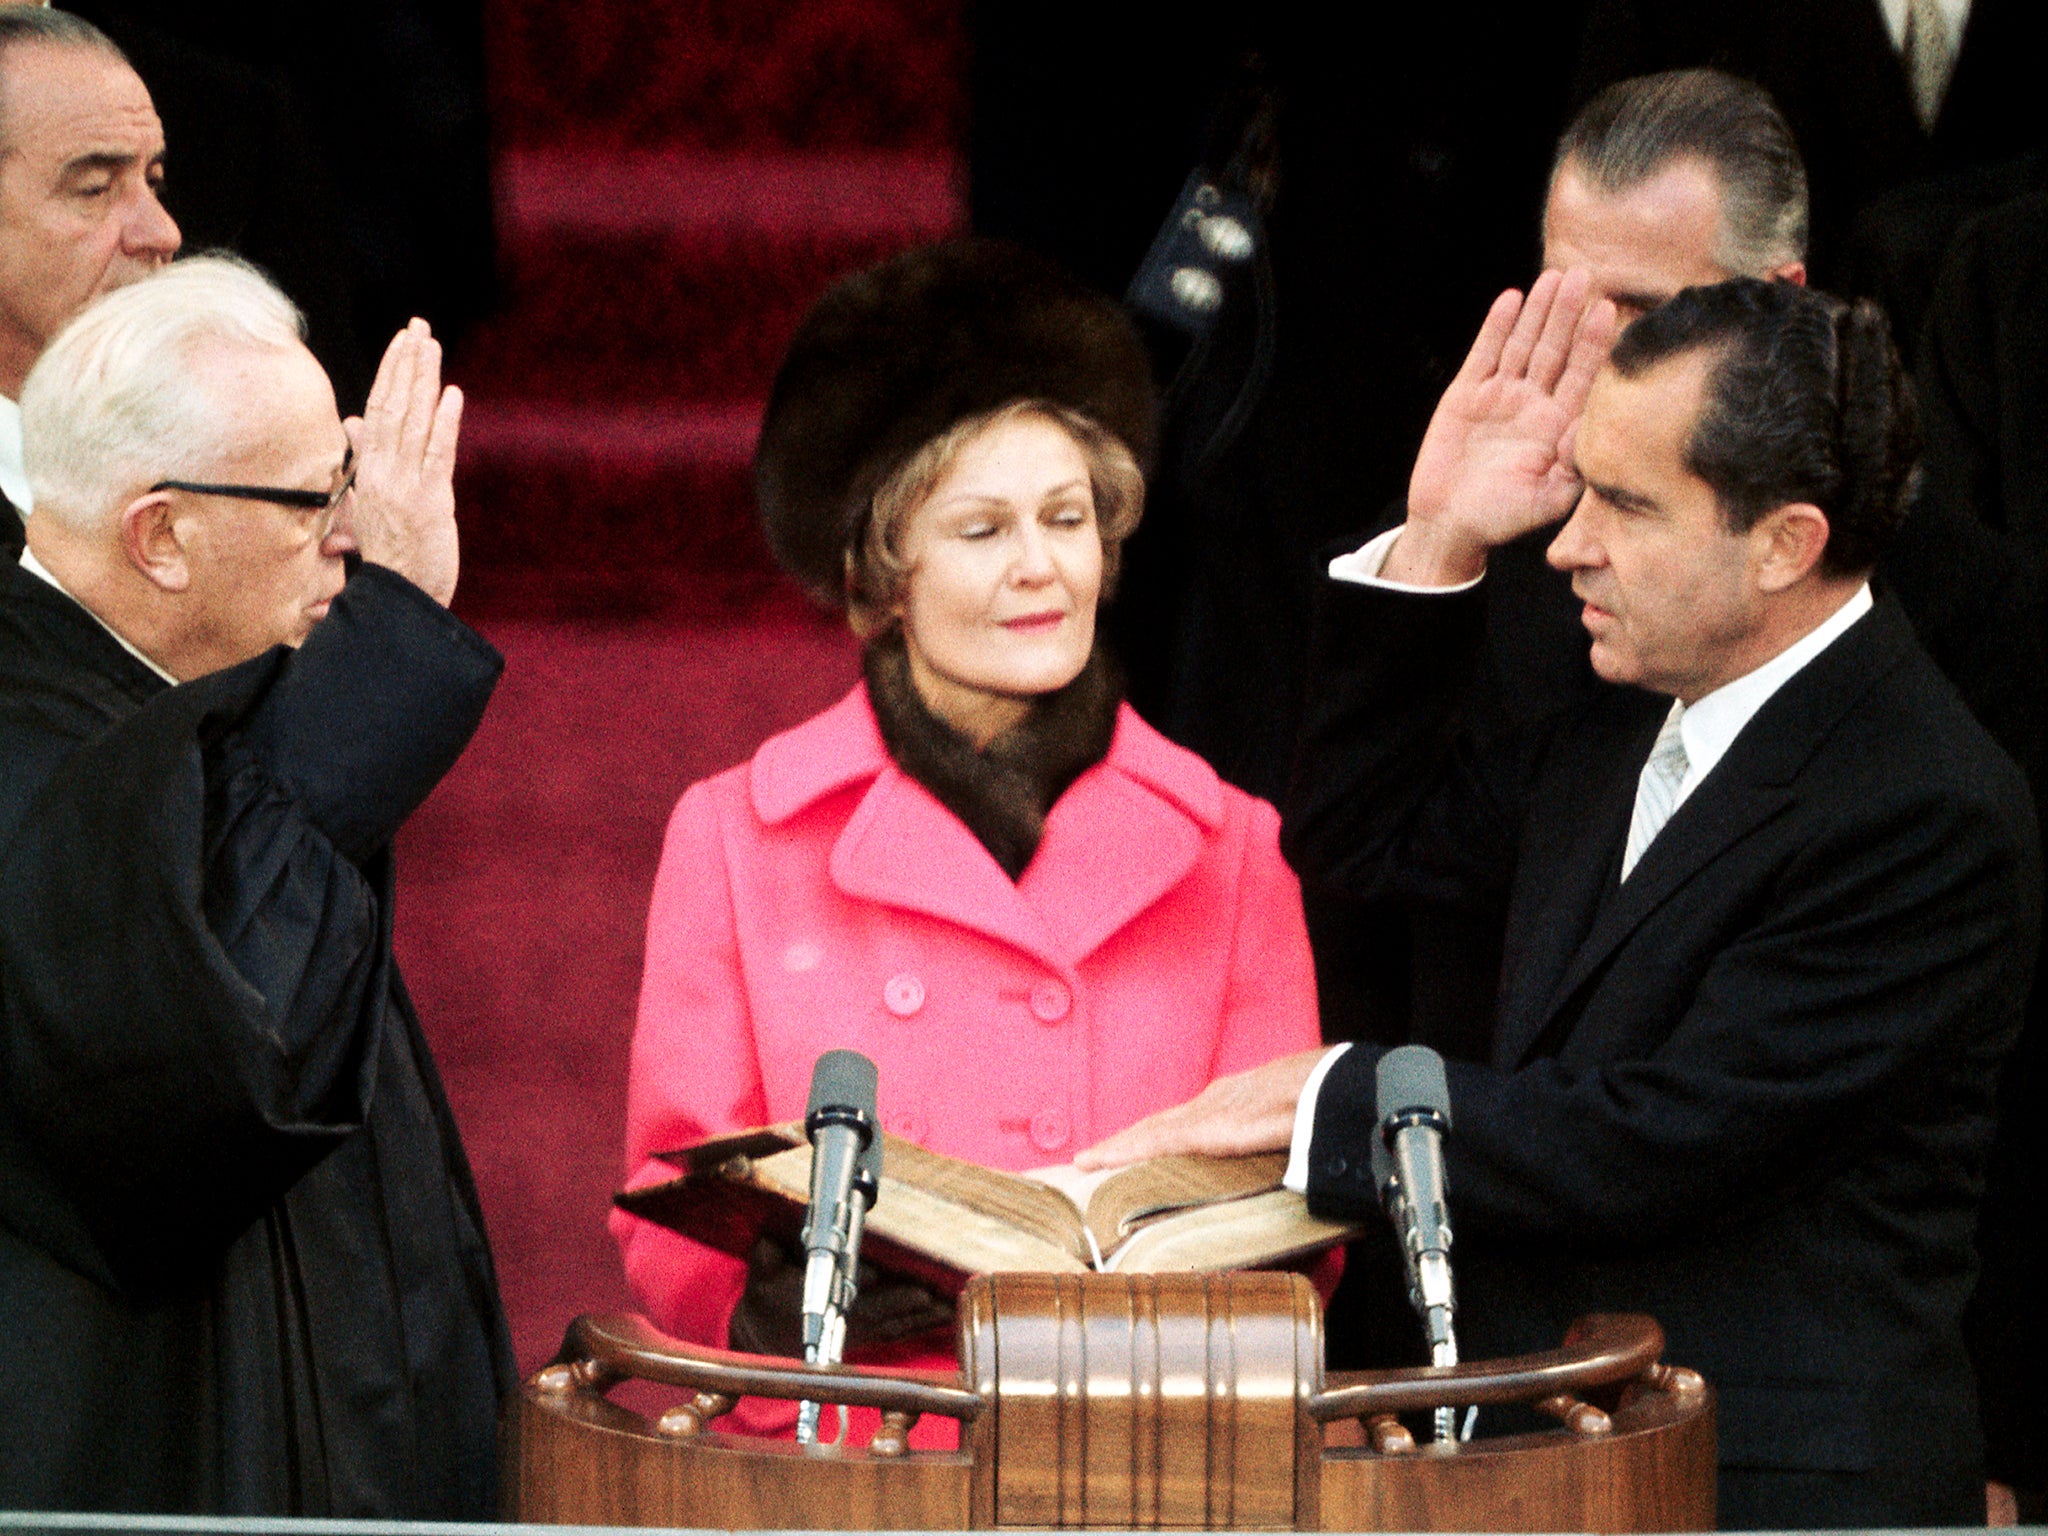 Chief Justice Earl Warren?swears in the 37th president on 20 January 1969, as Nixon’s wife Pat looks on